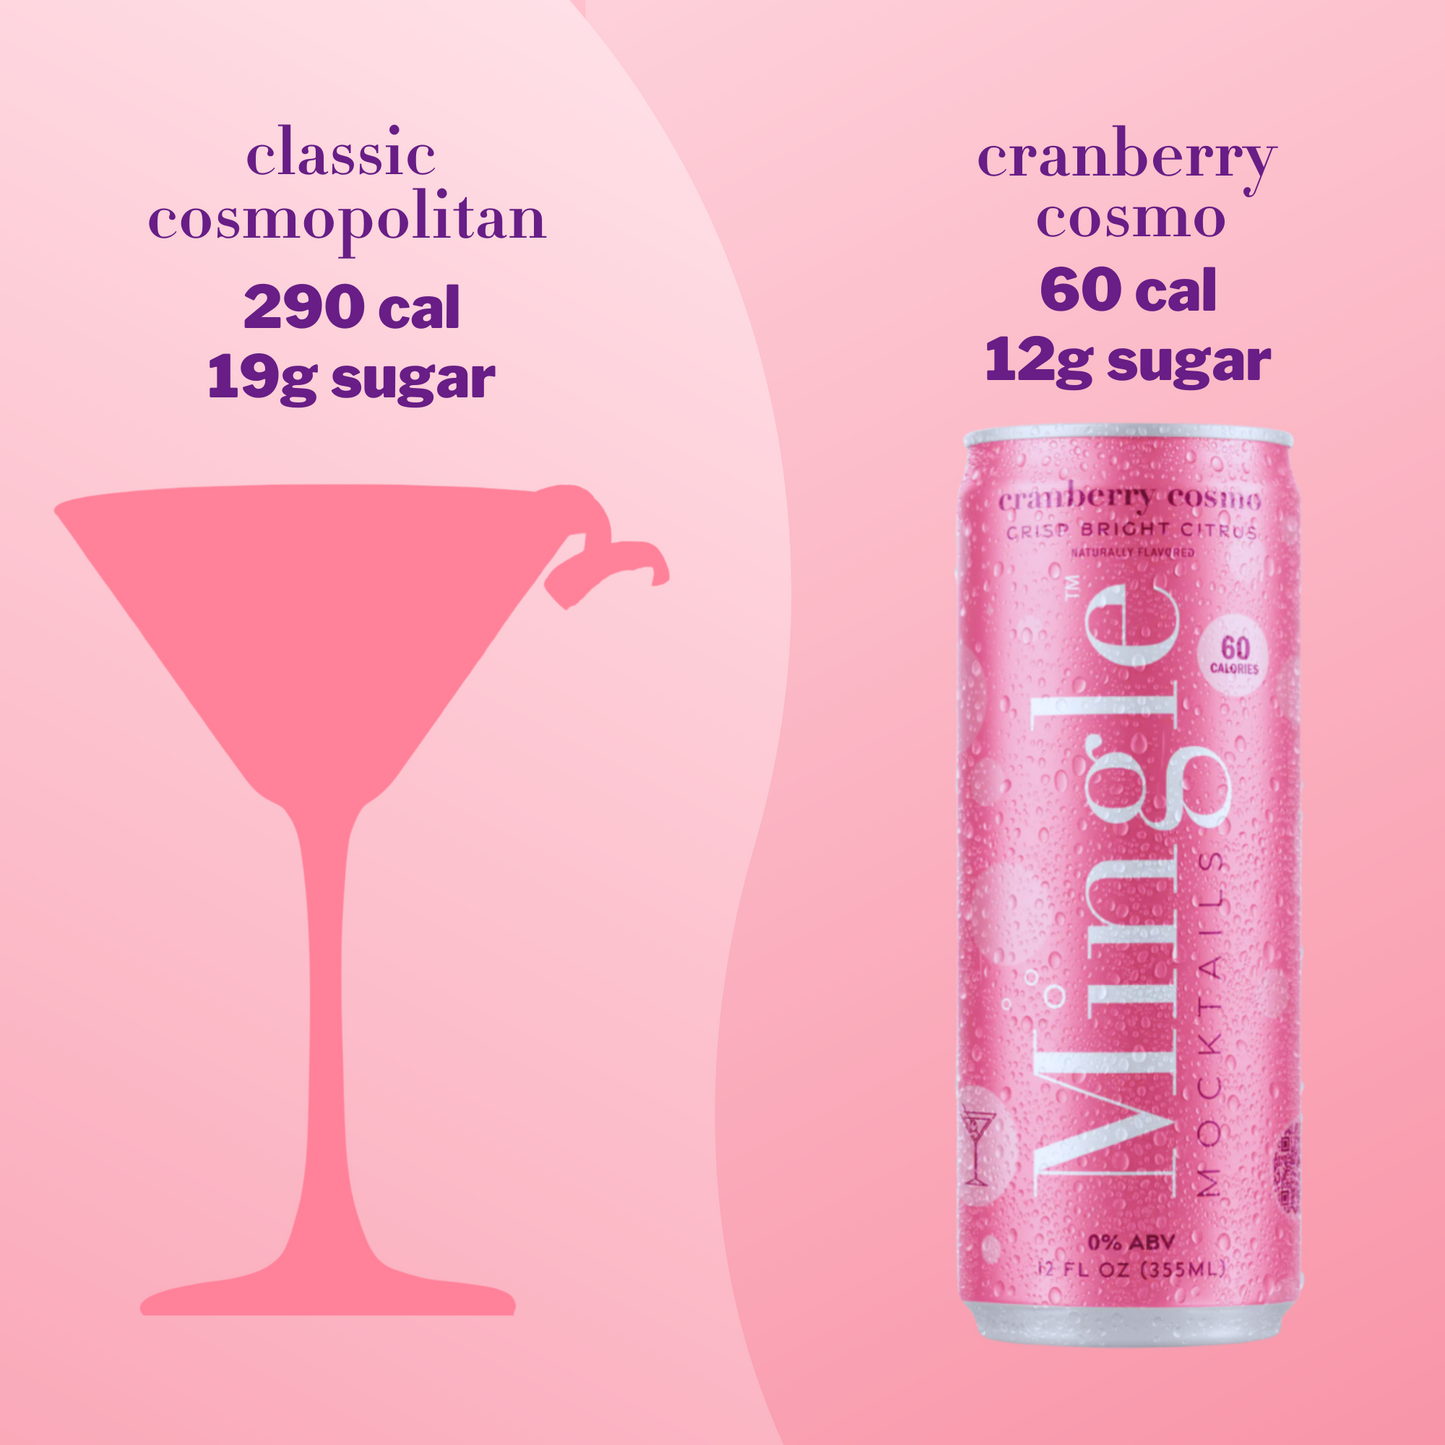 Mingle Mocktails - Cranberry Cosmo